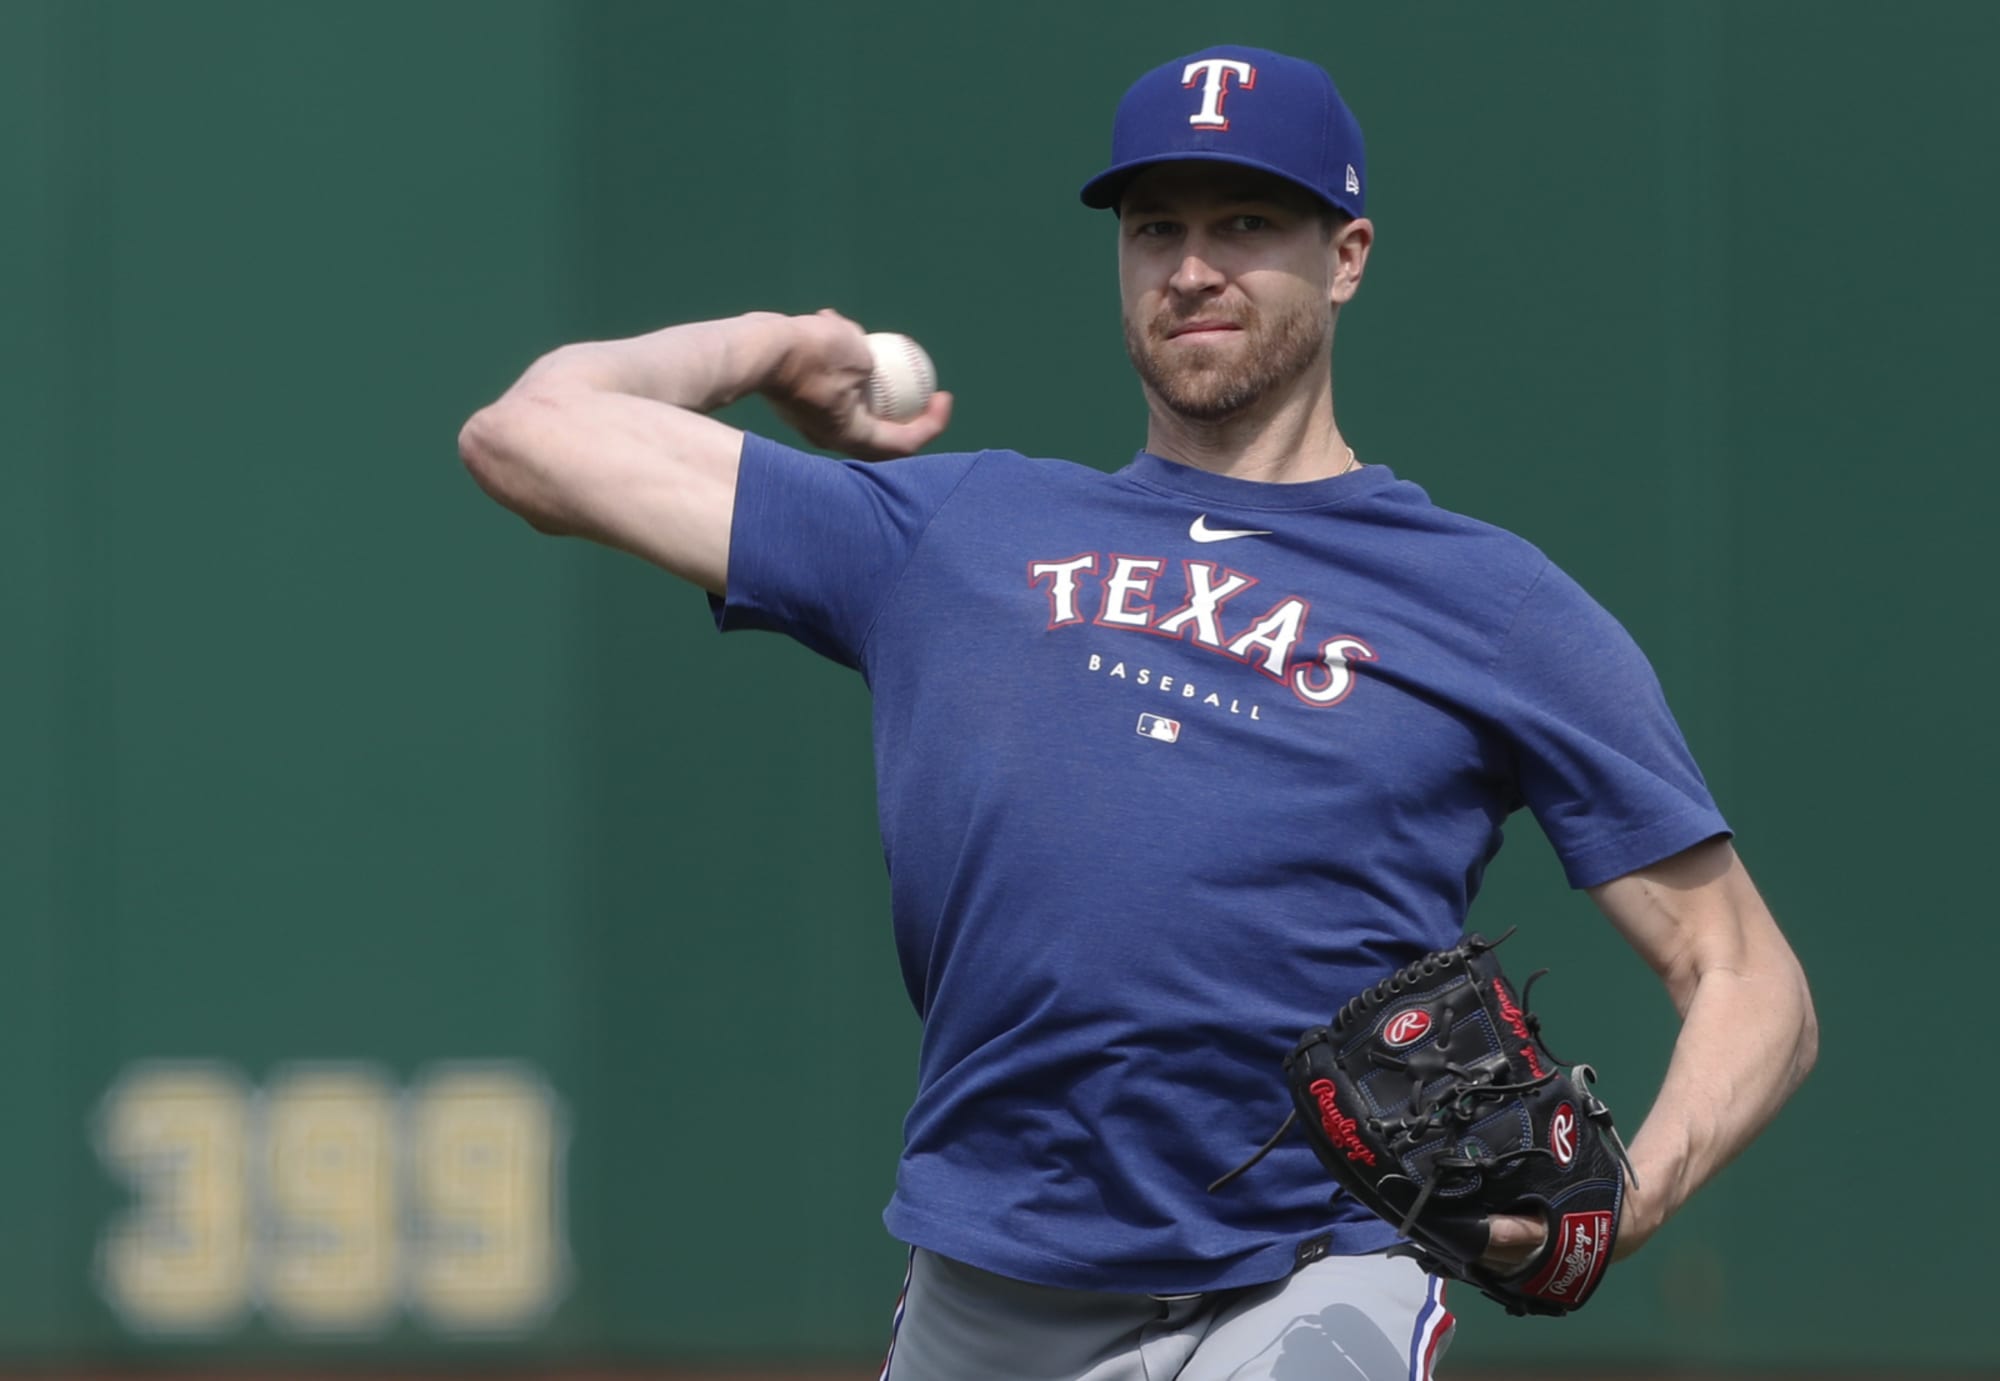 5 possible trade targets for Rangers now that Jacob deGrom's season is lost